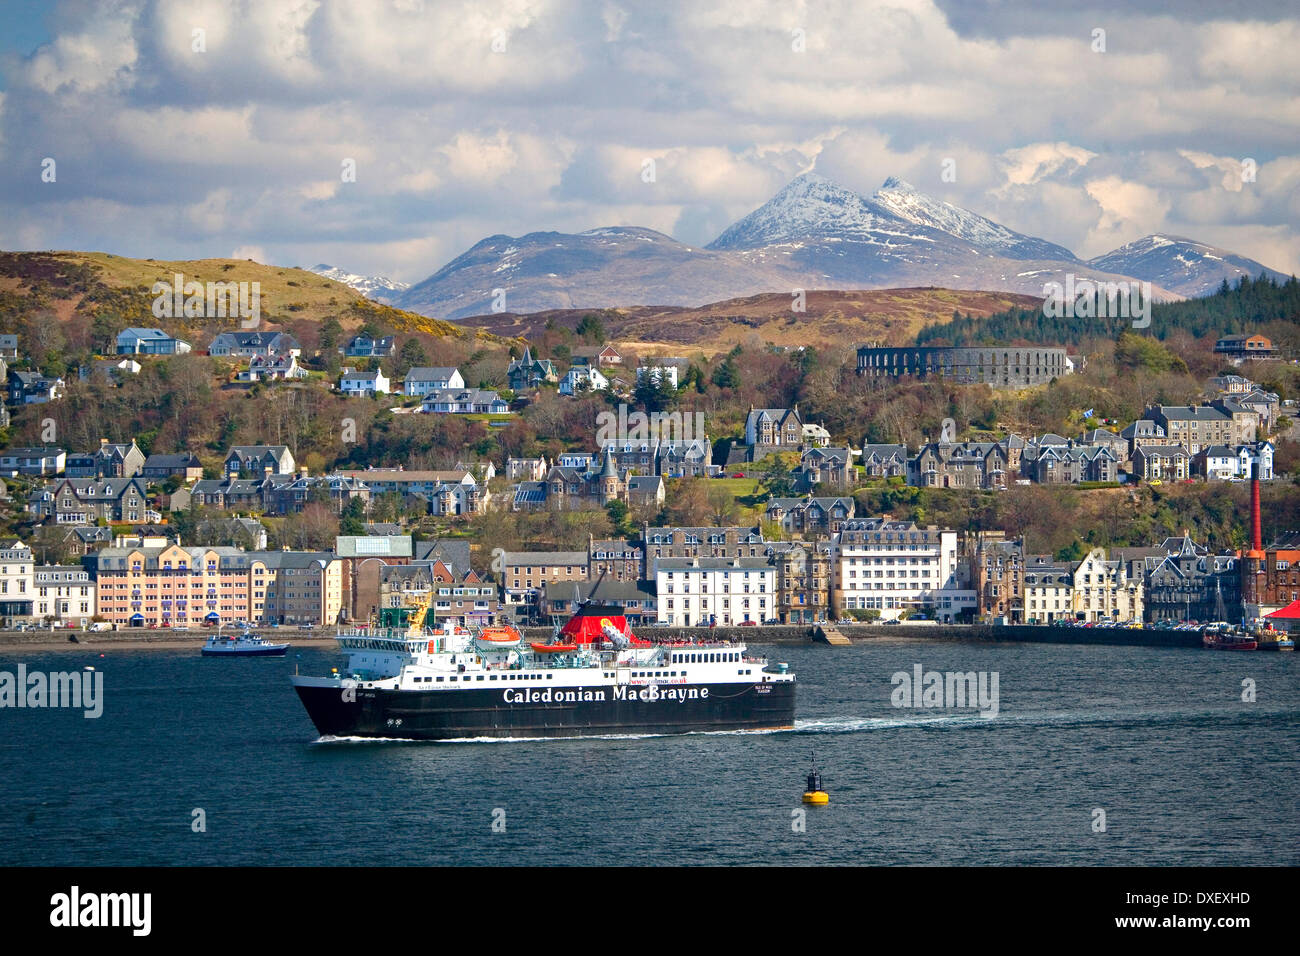 M.V.isle of Mull departs Oban with Ben Cruachan in view, Argyll. Stock Photo